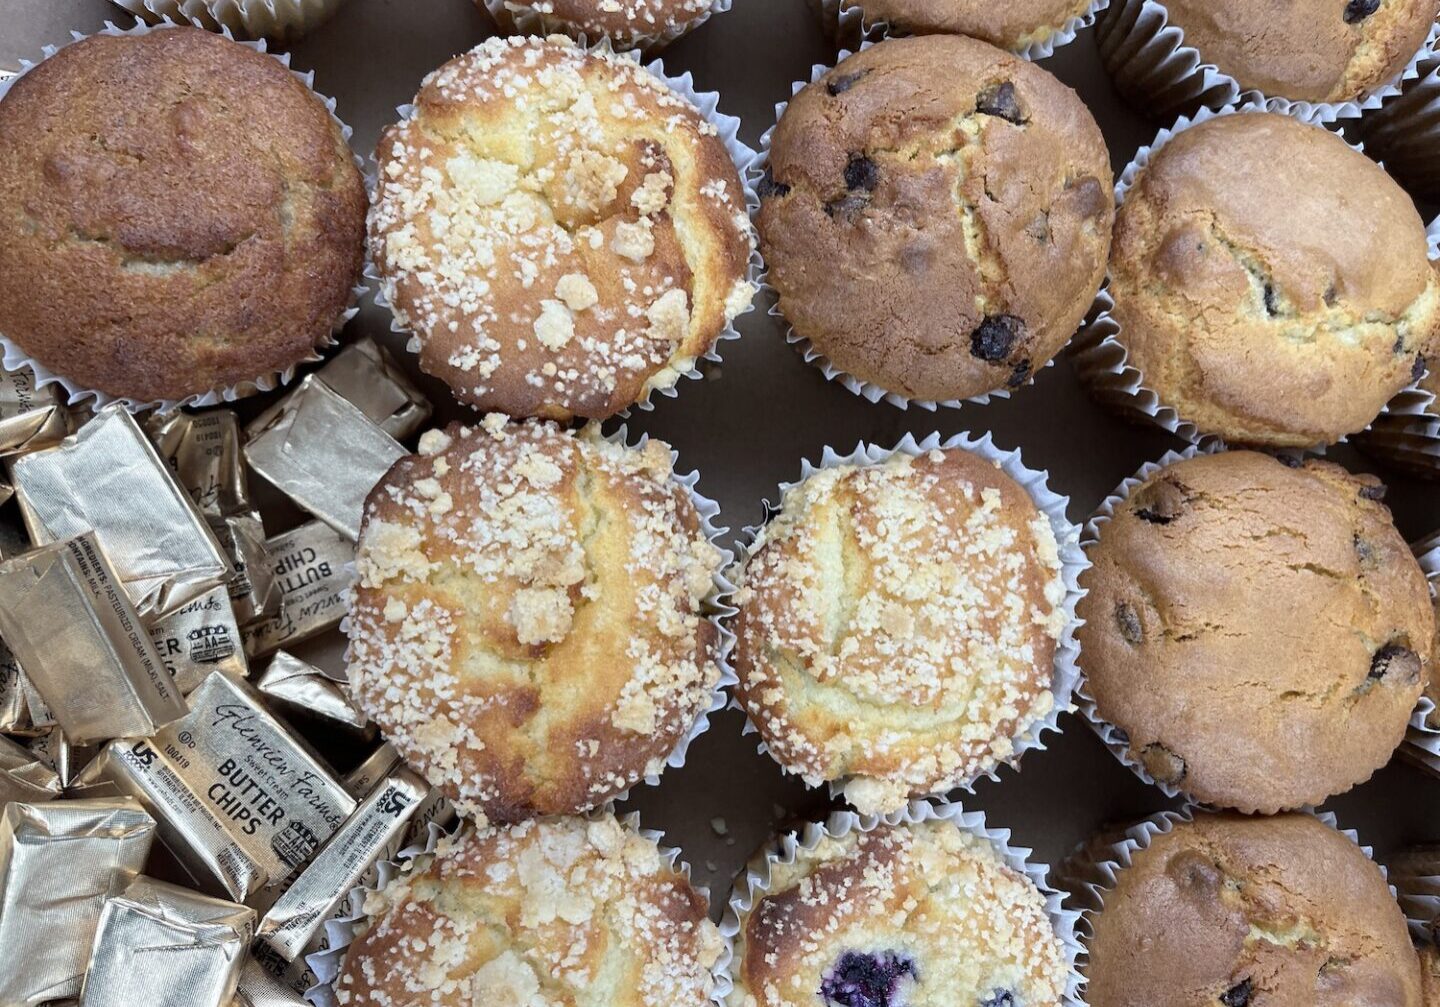 variety of wrapped muffins in a box.